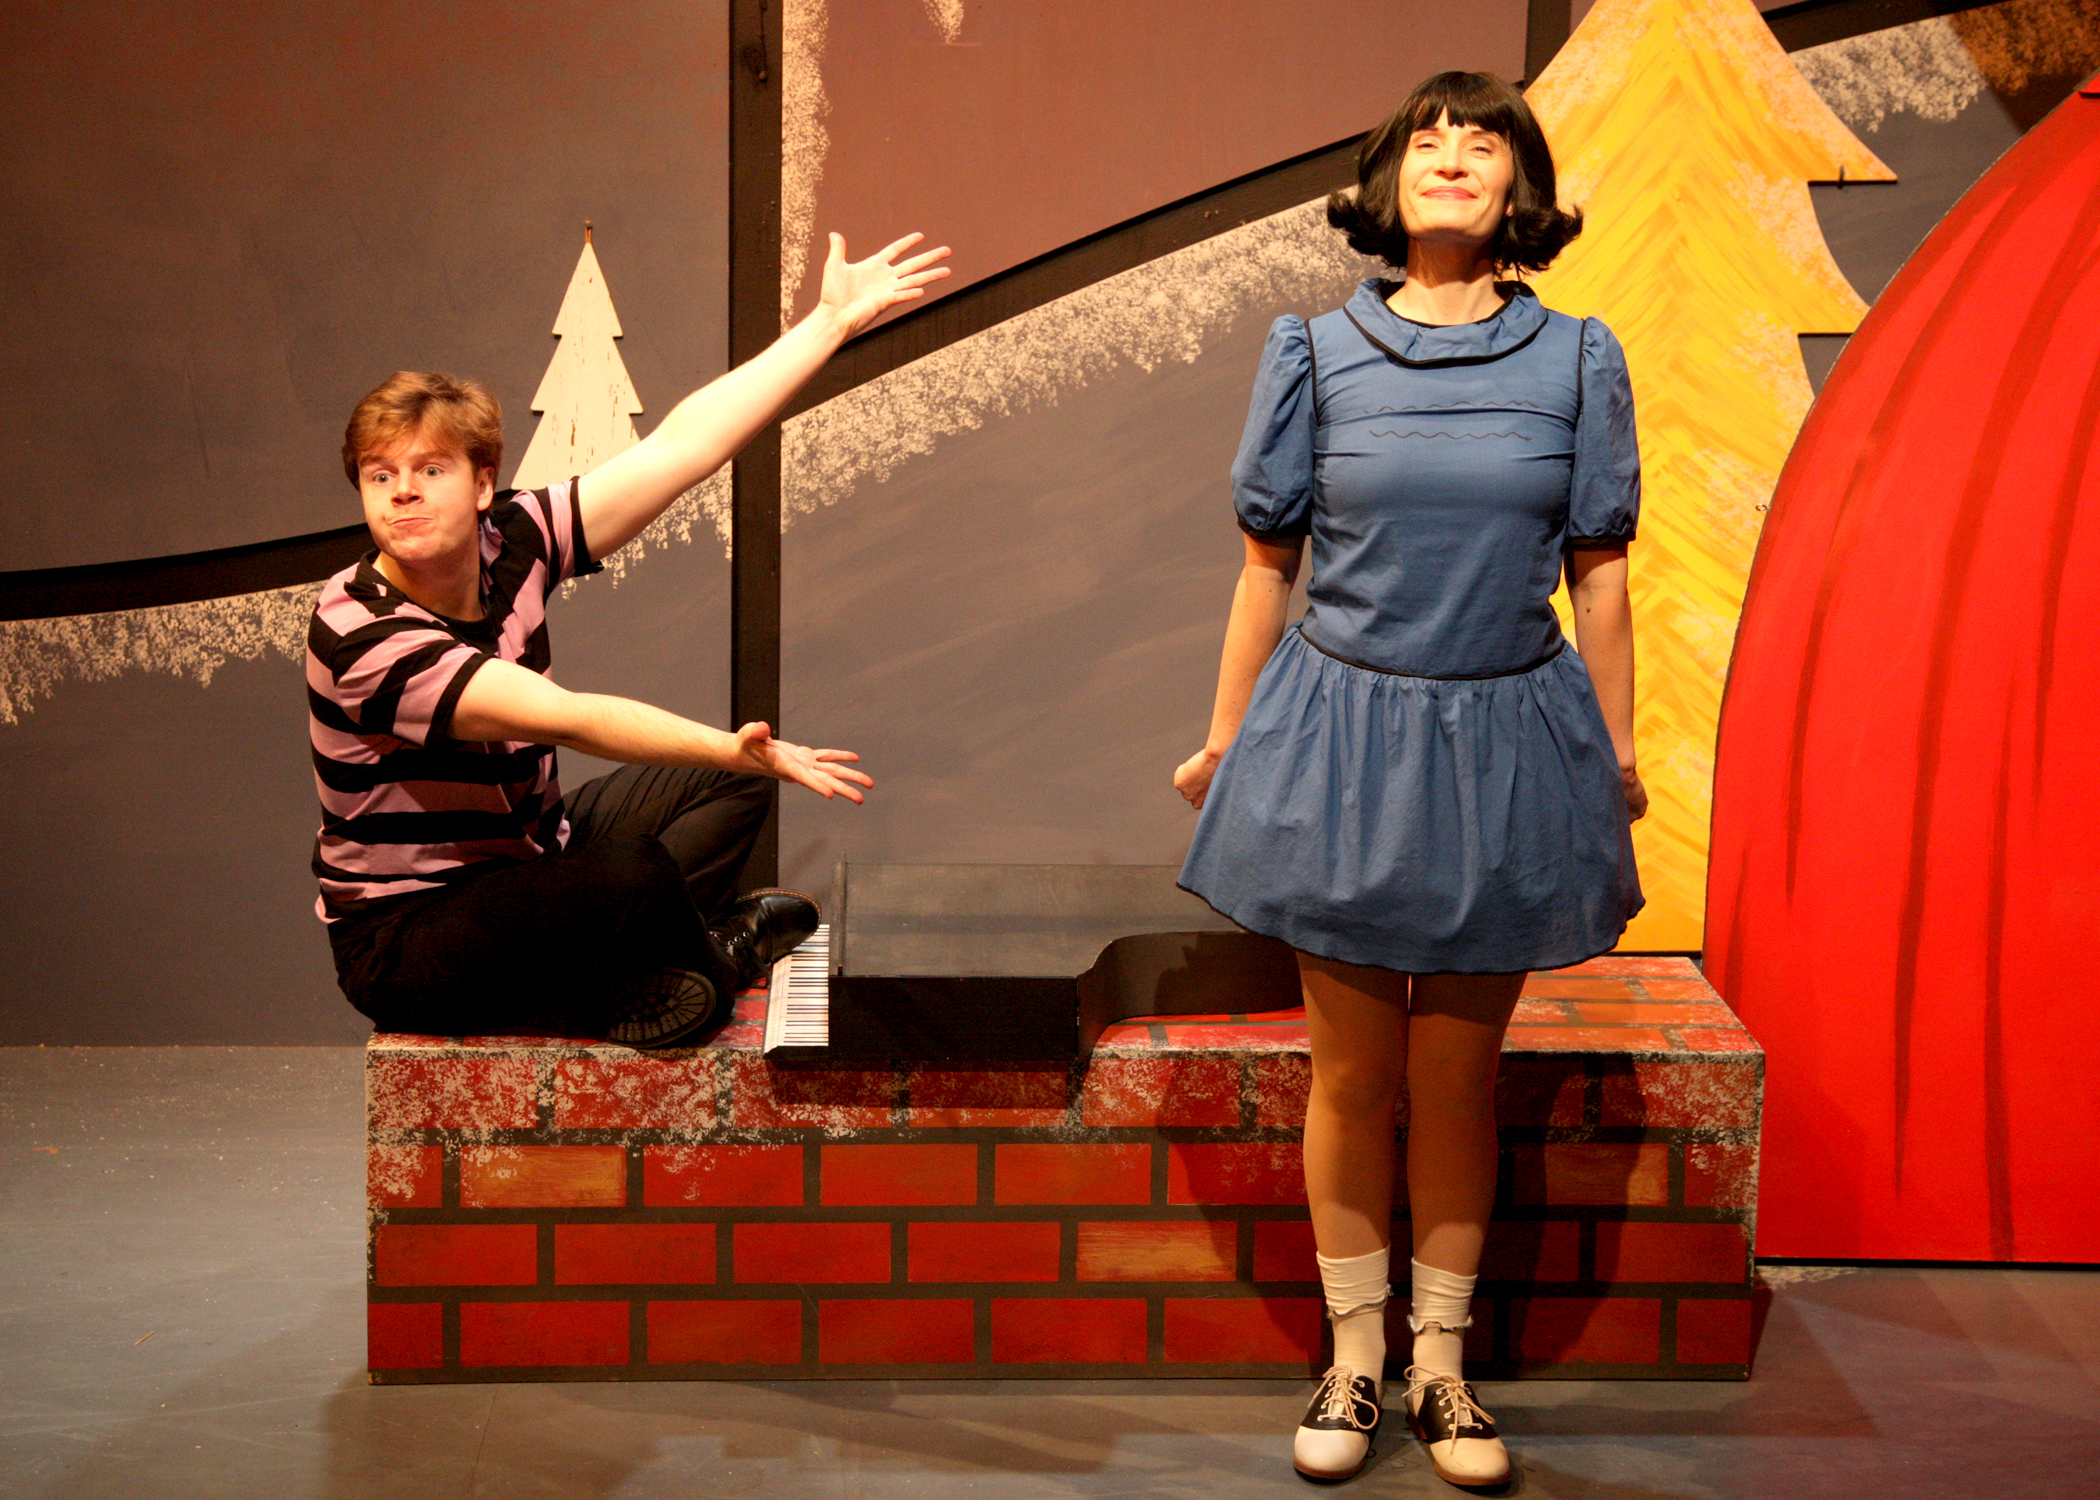 Christopher Diem and Laura M. Hathaway in the encore presentation of “A Charlie Brown Christmas.” This live version of Charles Schulz’s classic television special adapted by Eric Schaeffer and directed by James Michael McHale will run thru December 19, 2021 on the Fyda-Mar Stage at the Bette Aitken theater arts Center.
